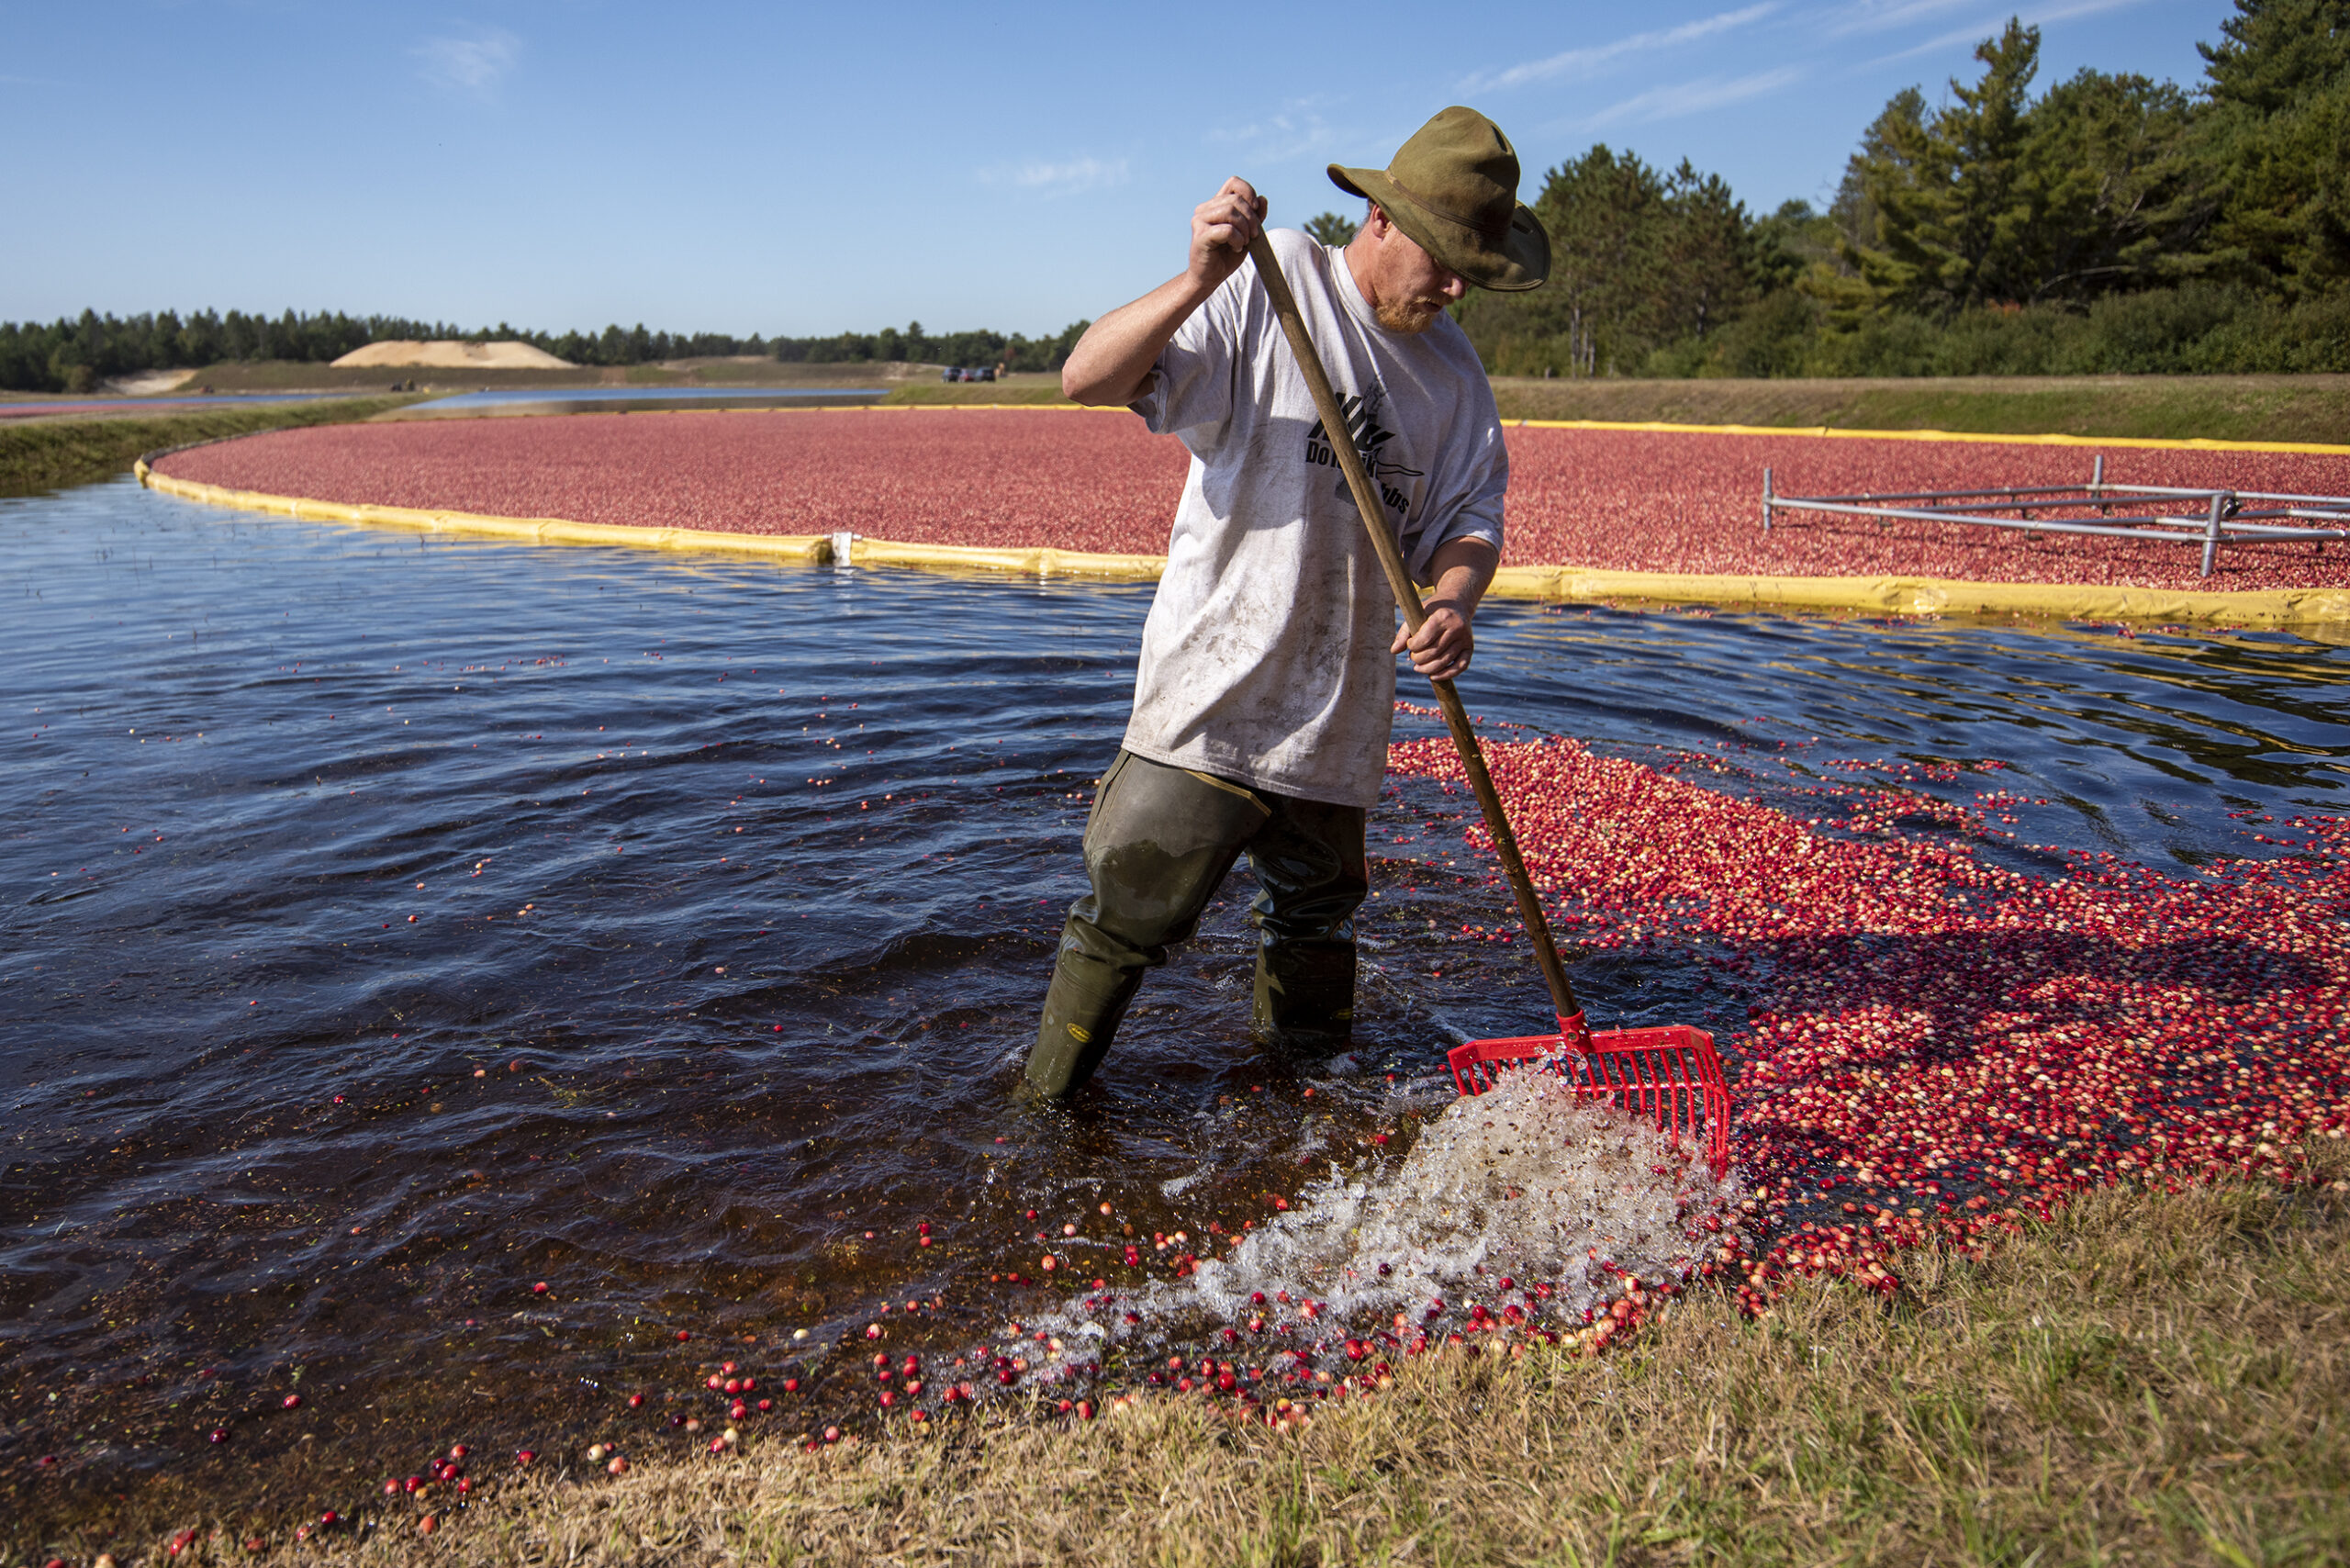 Wisconsin Cranberry Research Station Offers New Opportunities To ‘Move The Industry Forward’